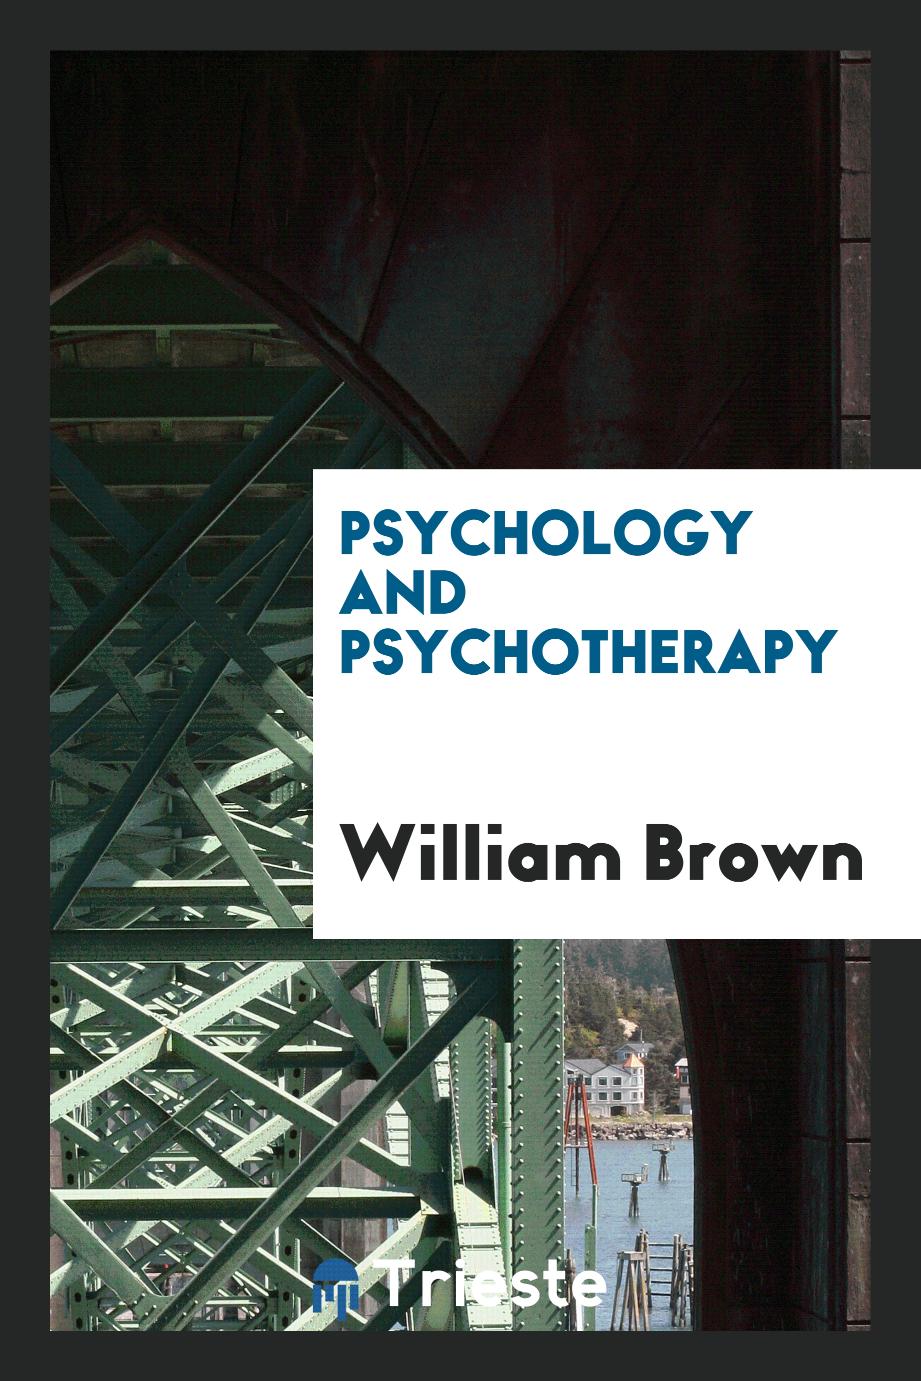 Psychology and psychotherapy